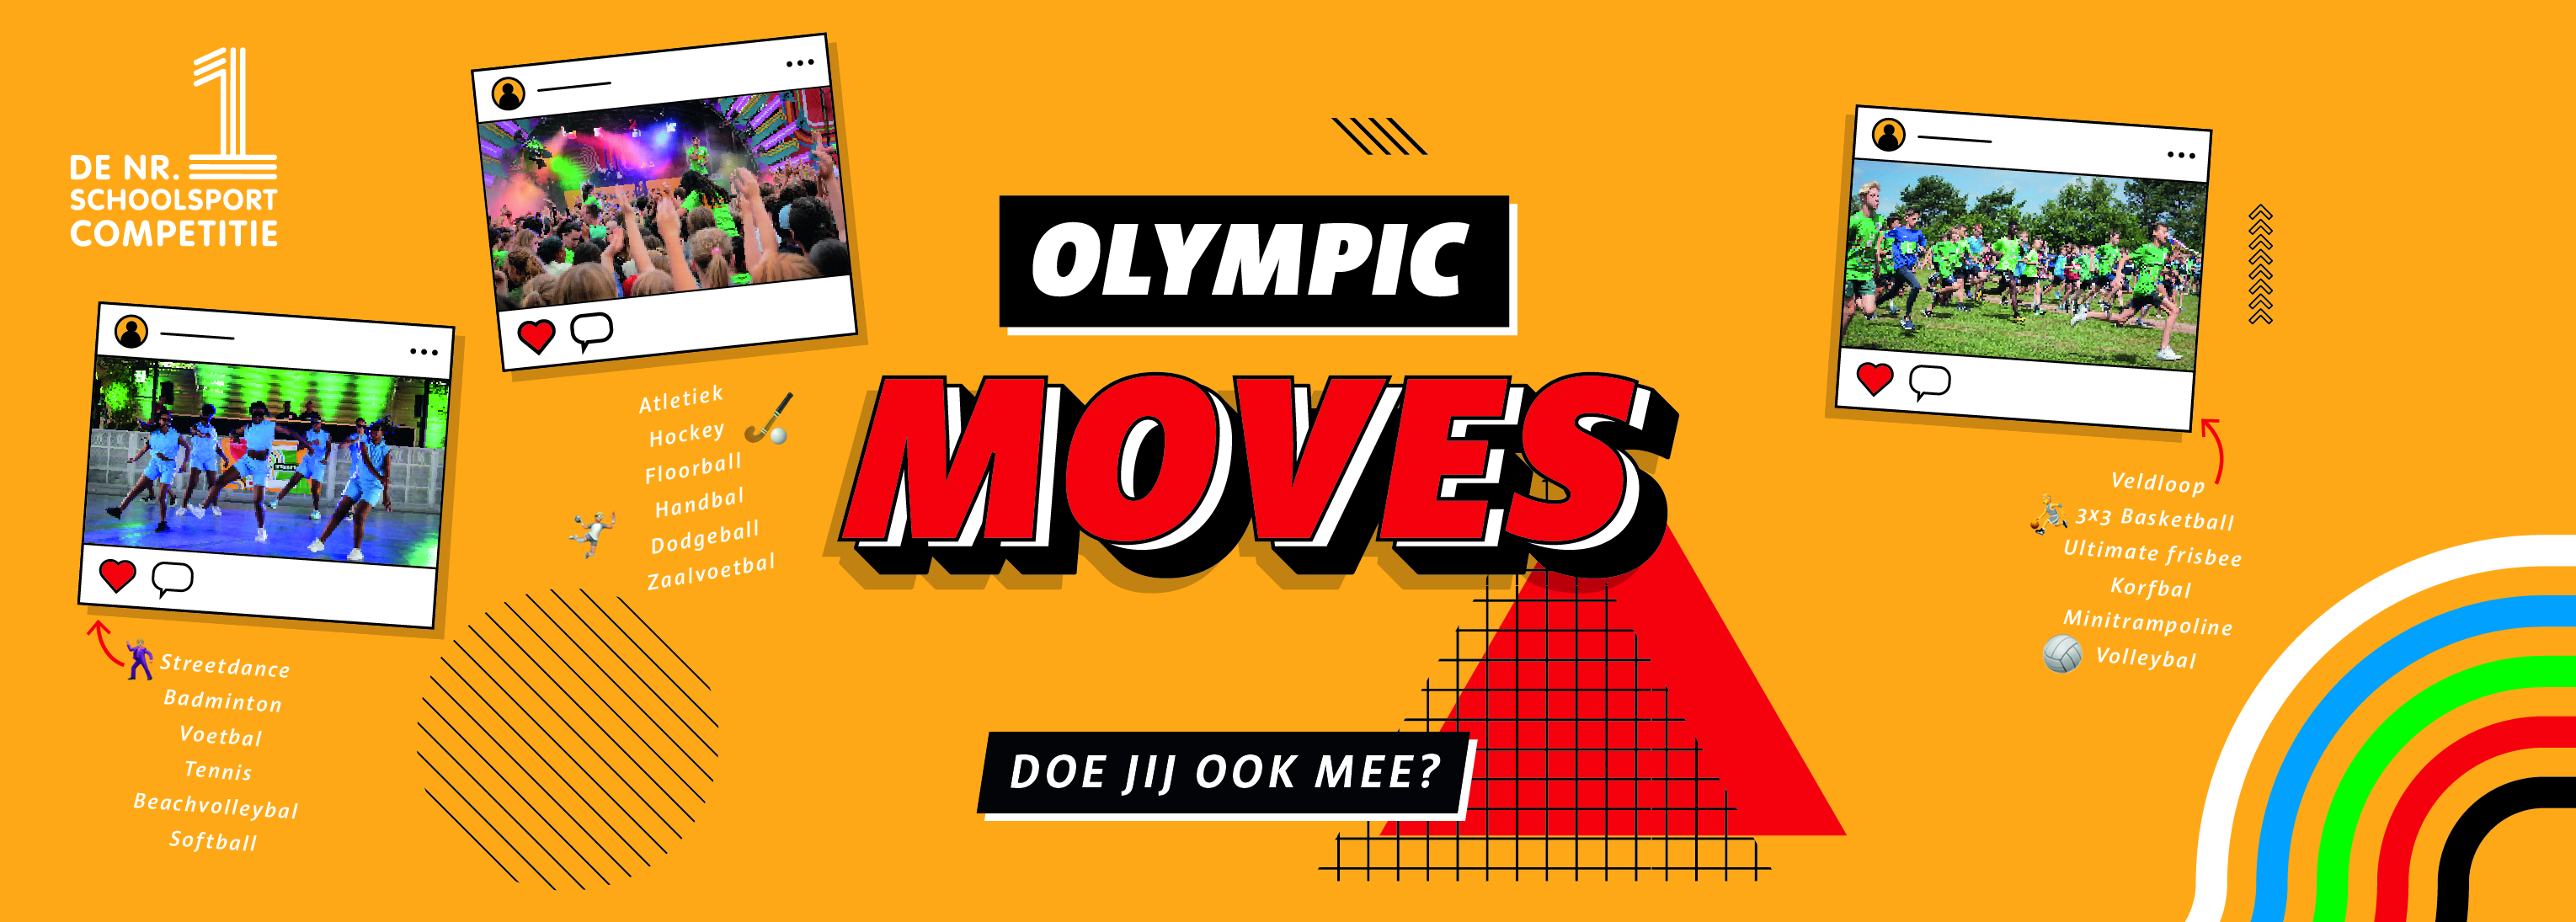 20220913 Olypic Moves Poster 2023 01.jpg